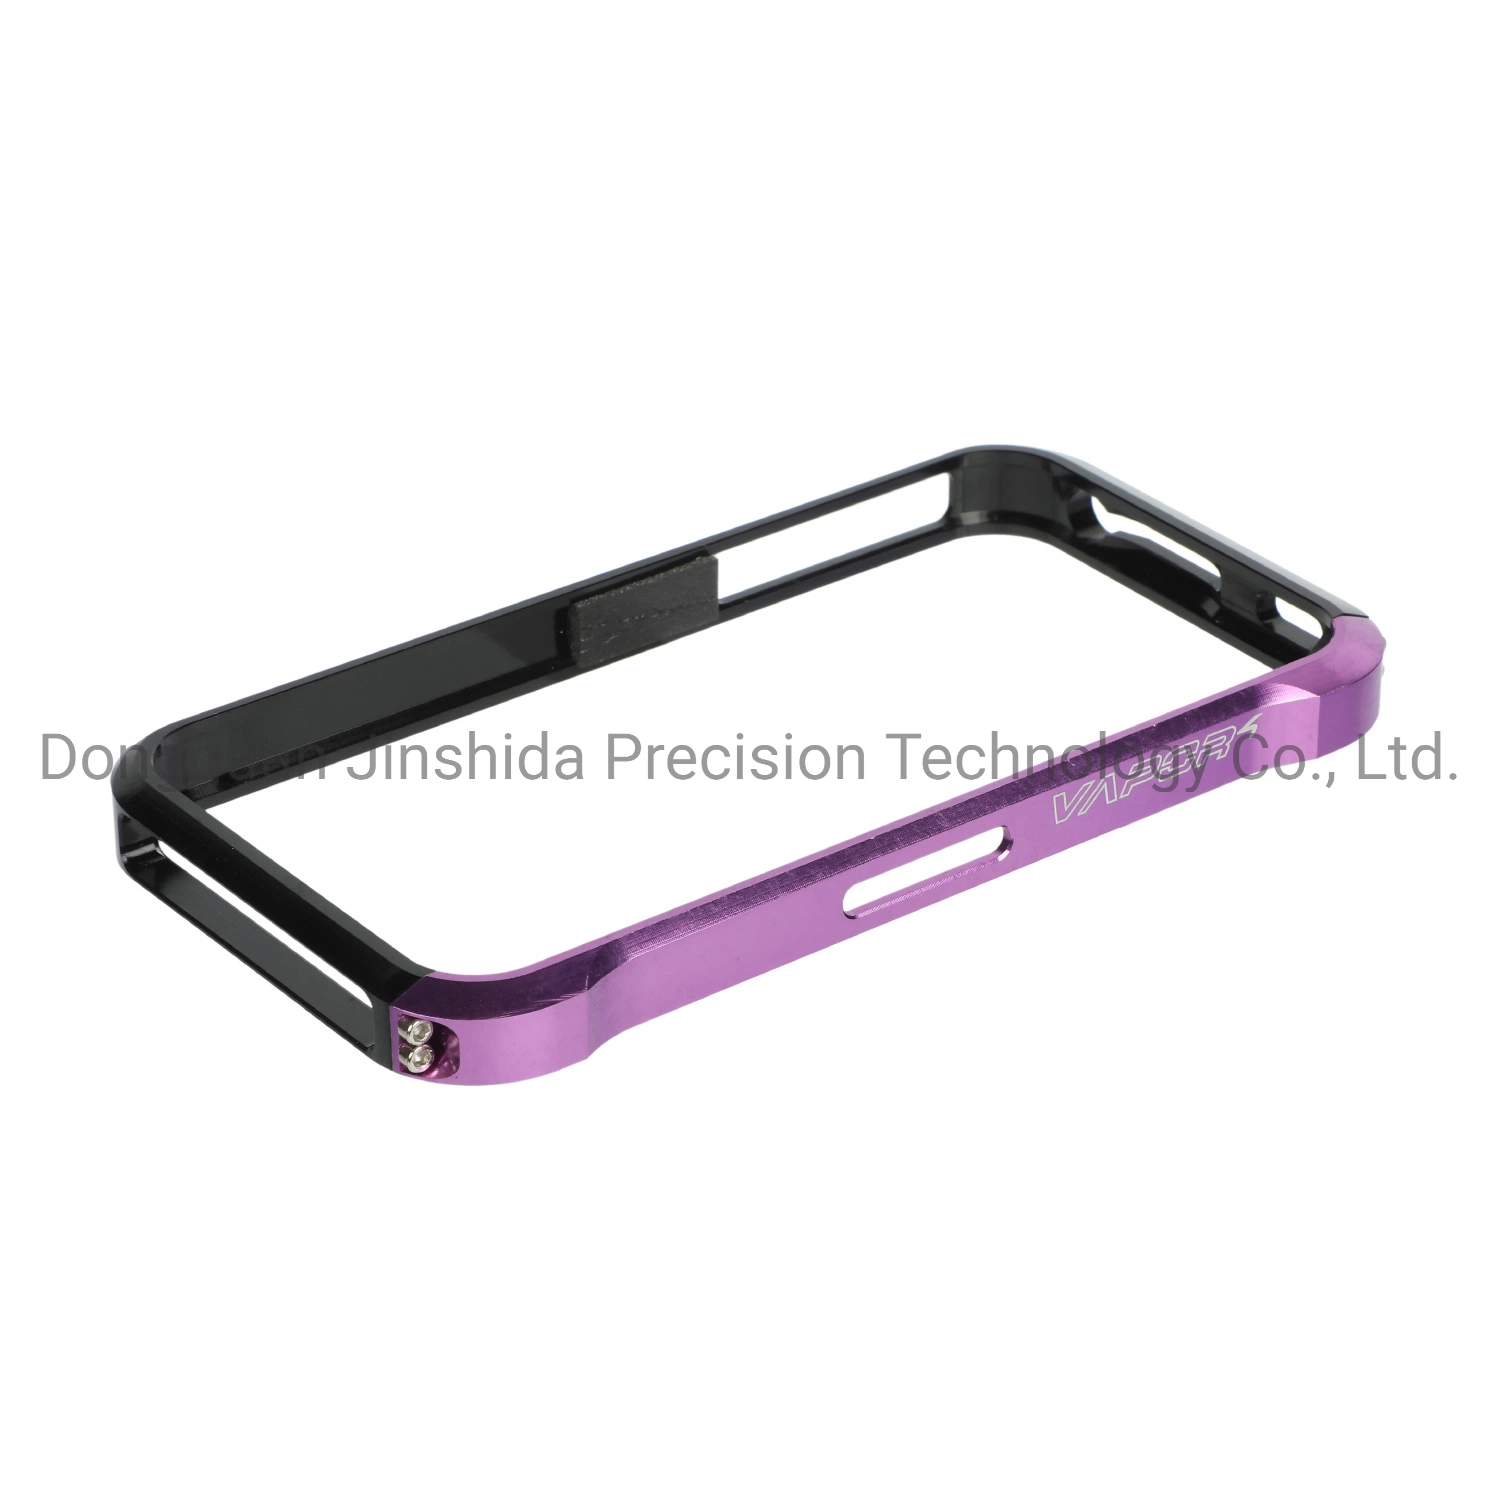 OEM/ODM Die Casting Part Mobile Phone Frame Mobile Phone Protective Shell CNC Machined Customized Products